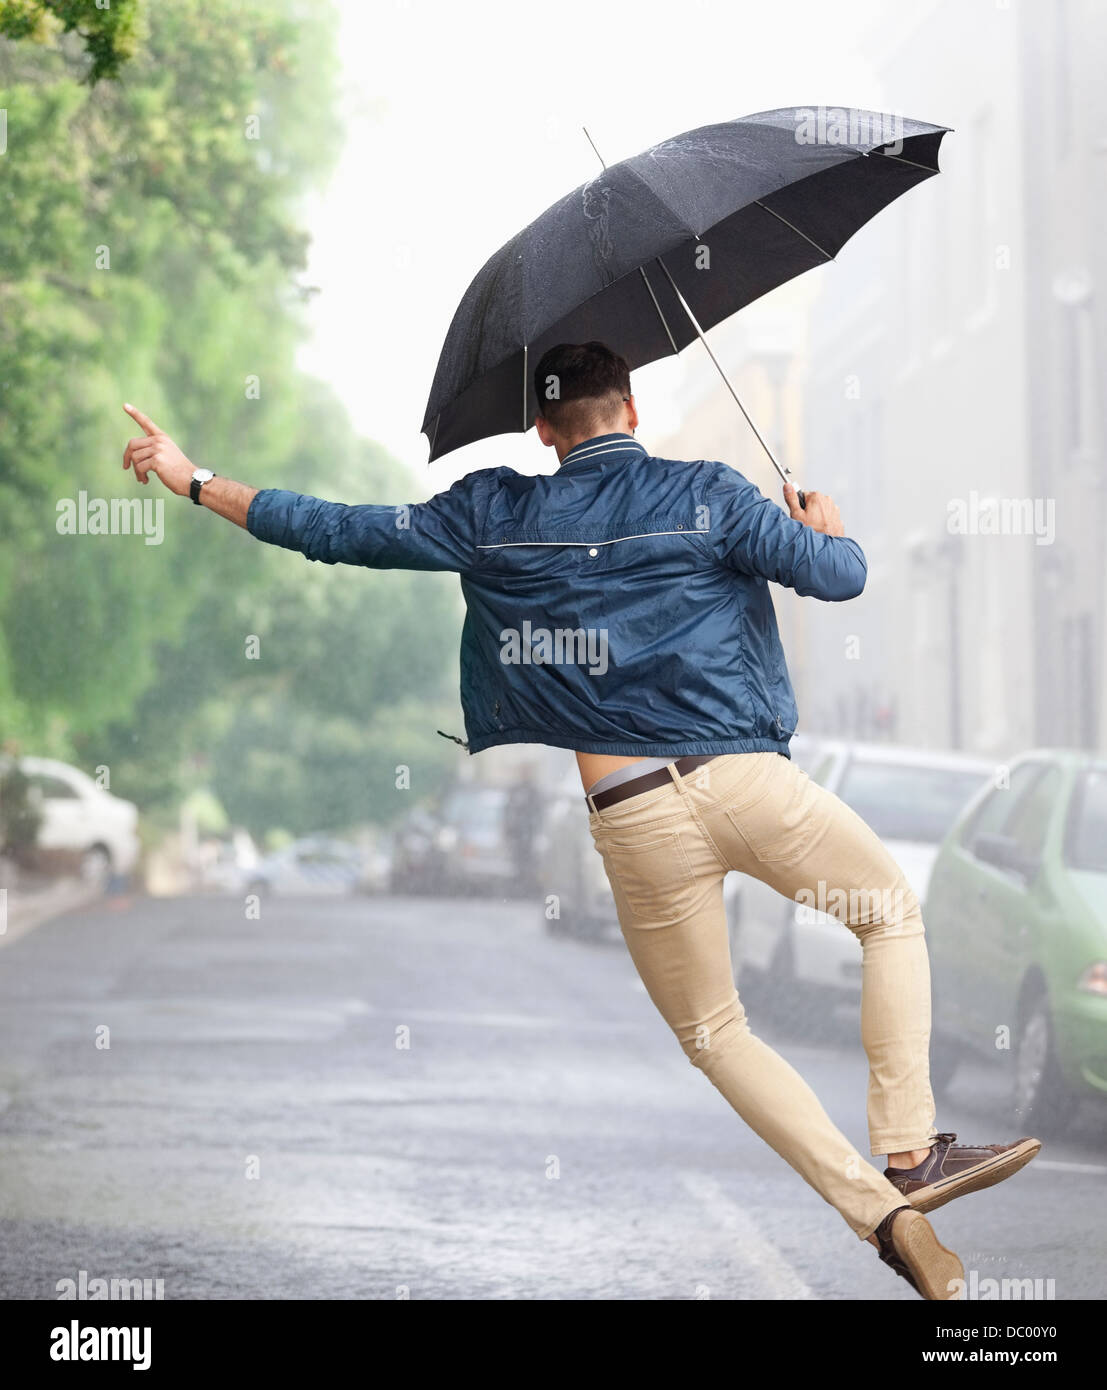 Man dancing with umbrella in rainy street Banque D'Images